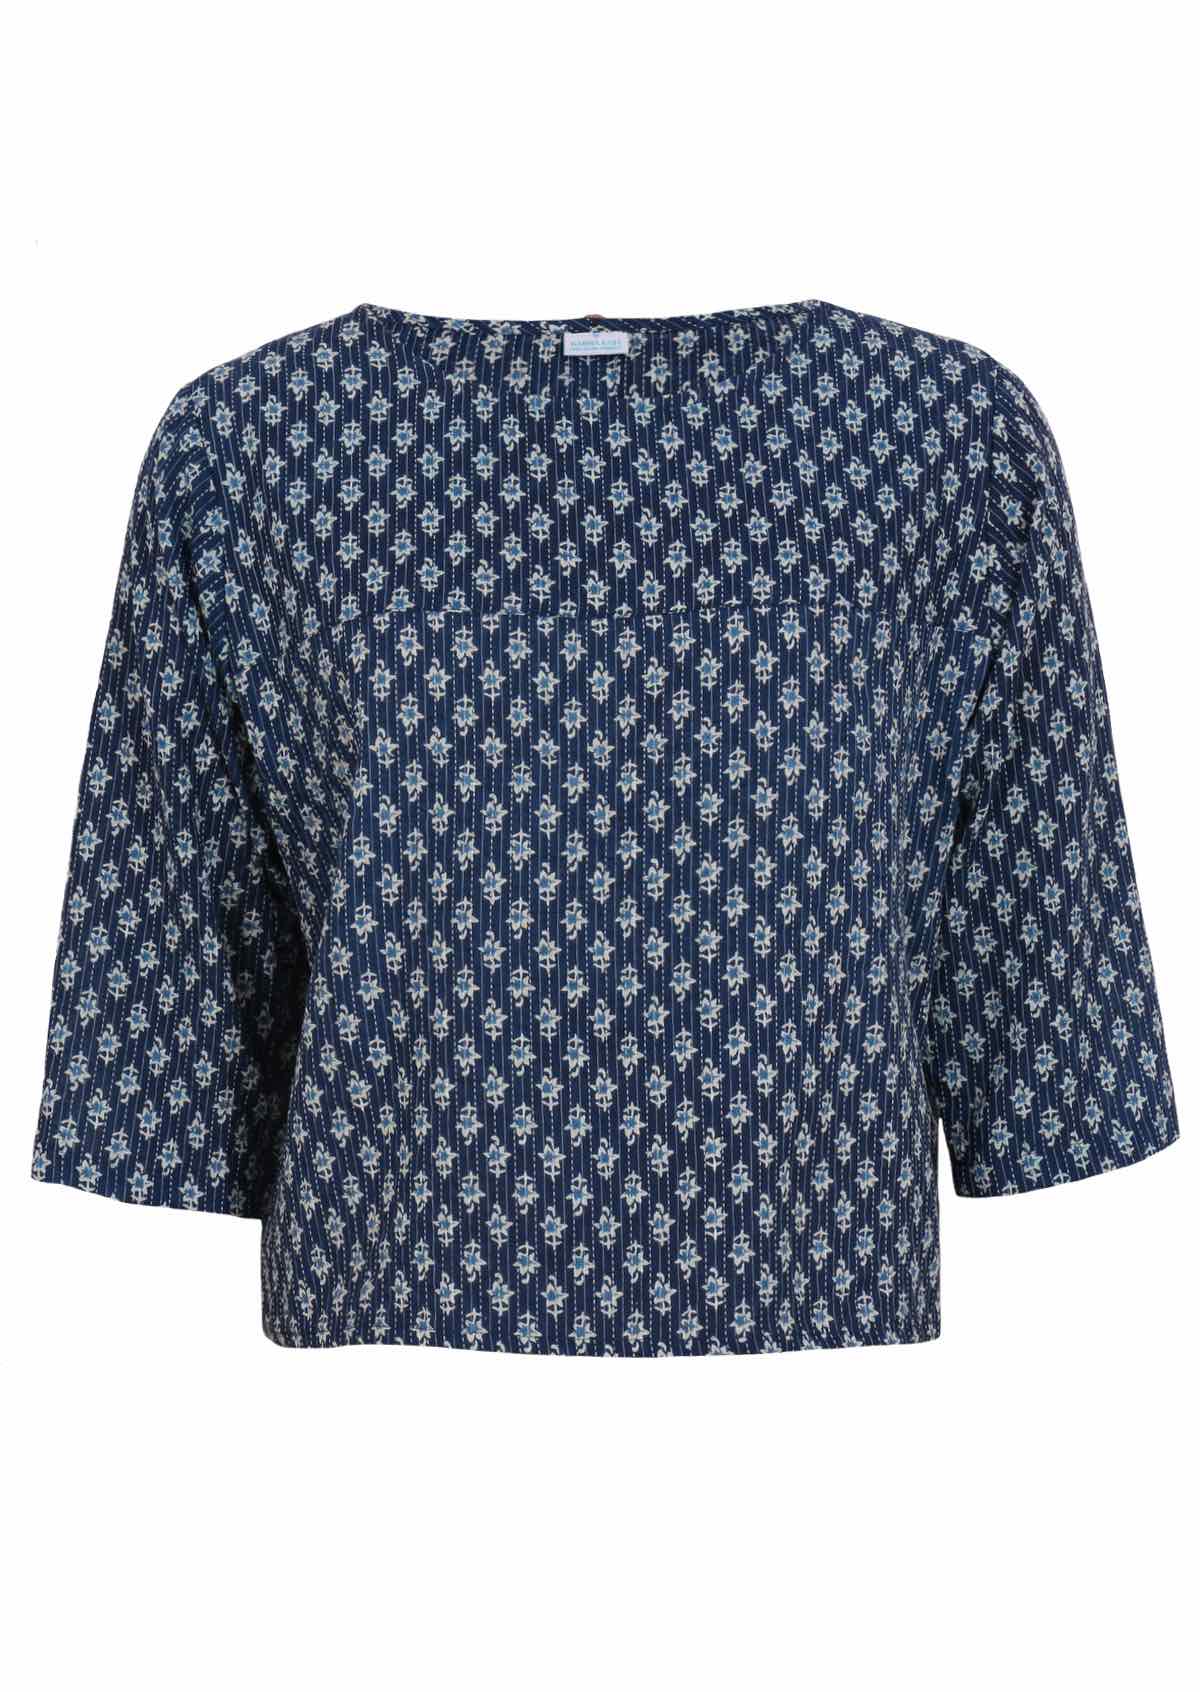 Blue floral top features a seam across the bust. 